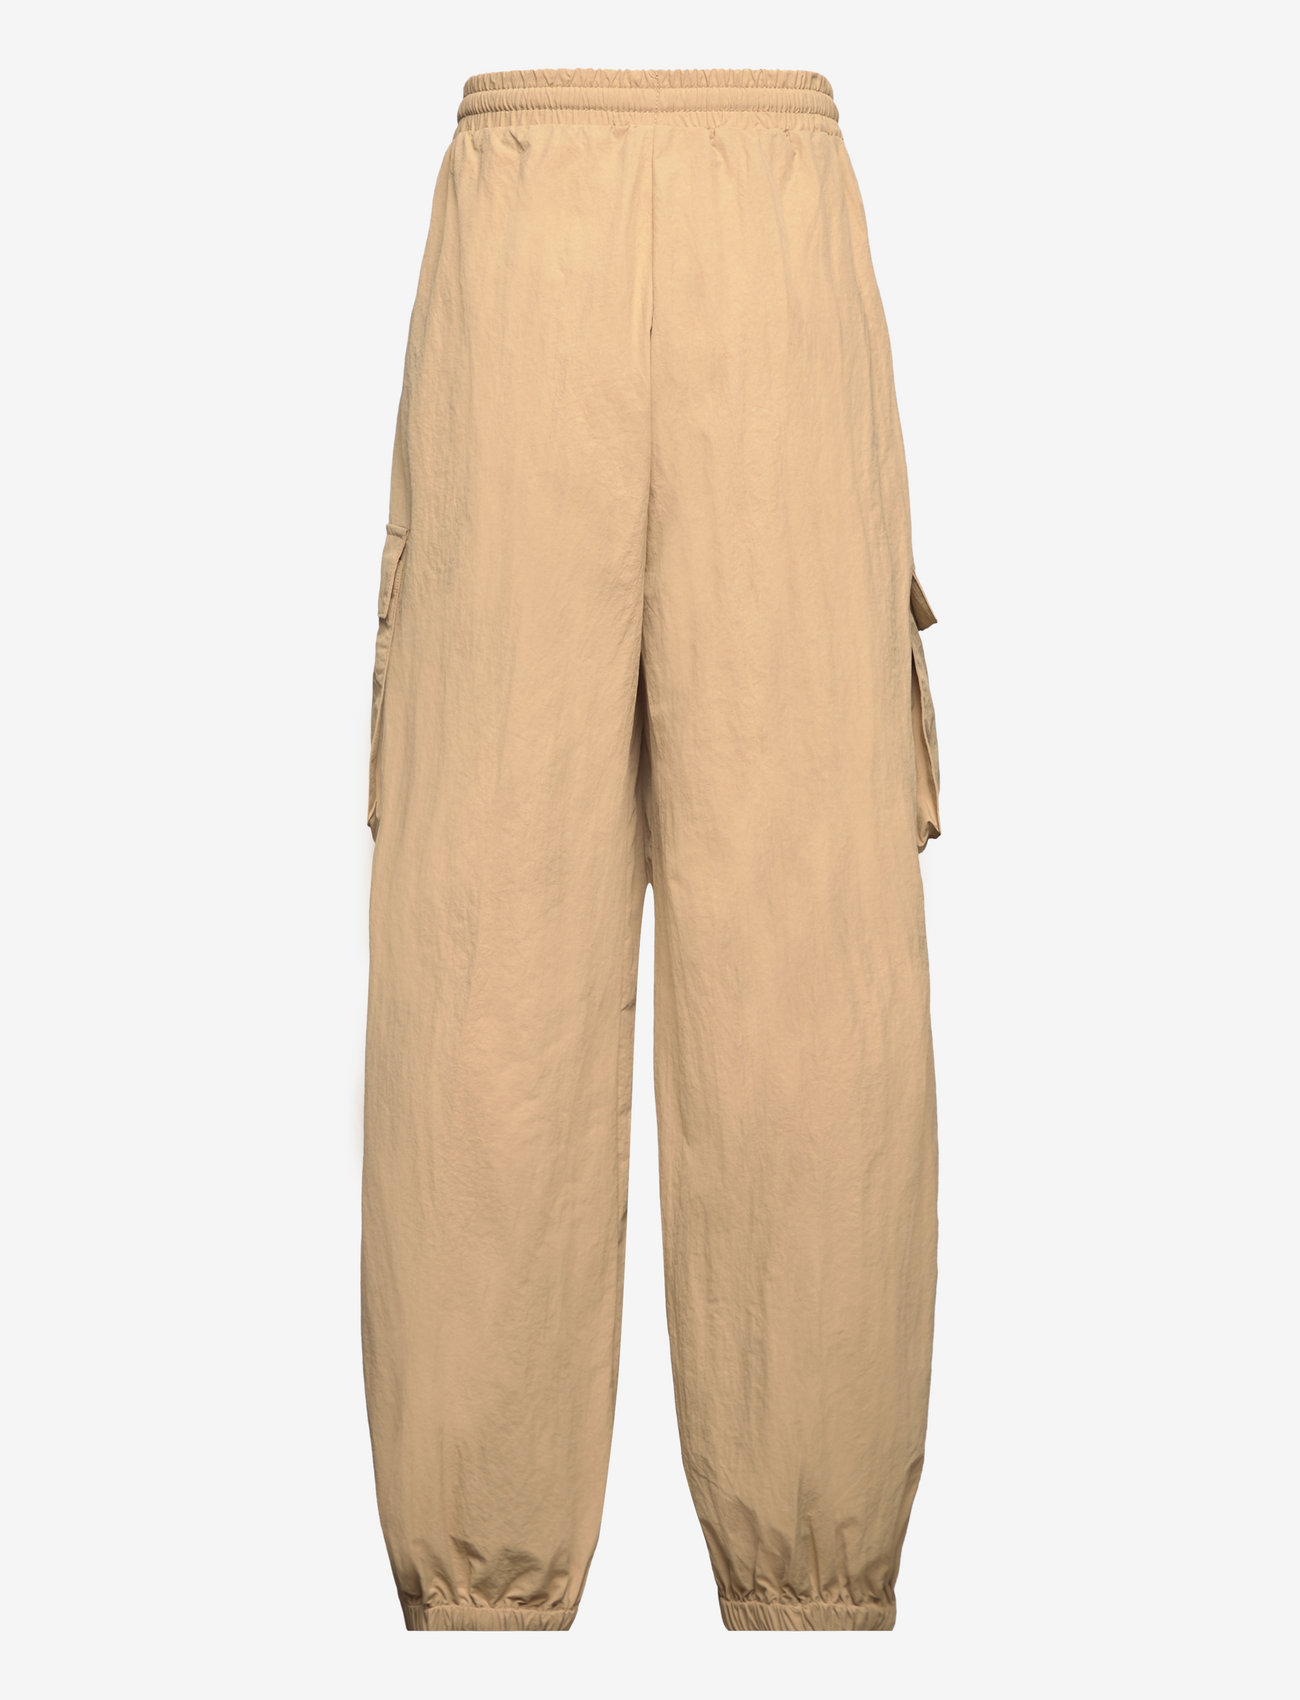 Sofie Schnoor Young - Trousers - pantalons - beige - 1